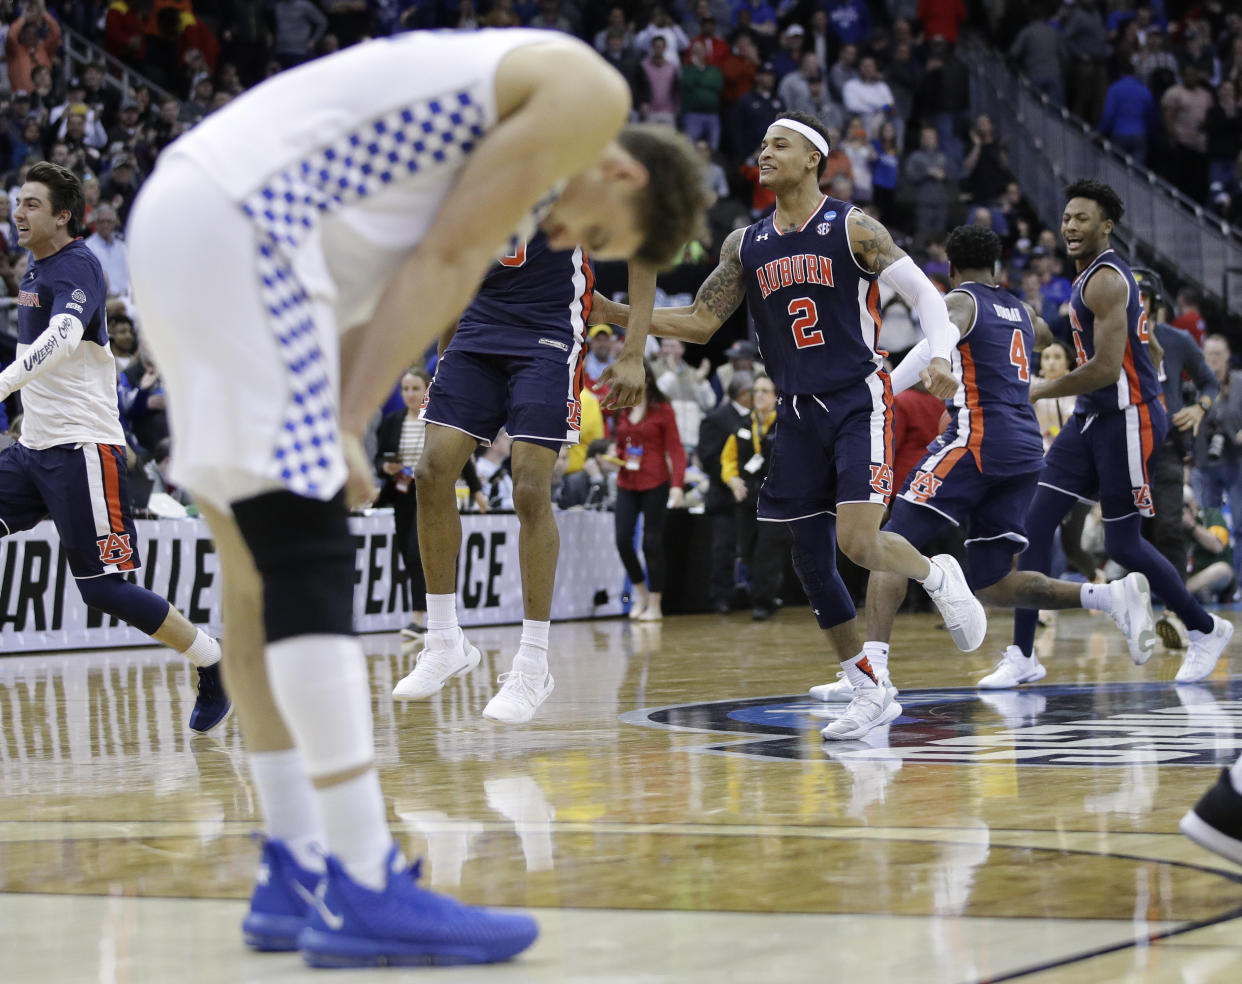 Kentucky's season came to a painful end short of the Final Four. (AP)